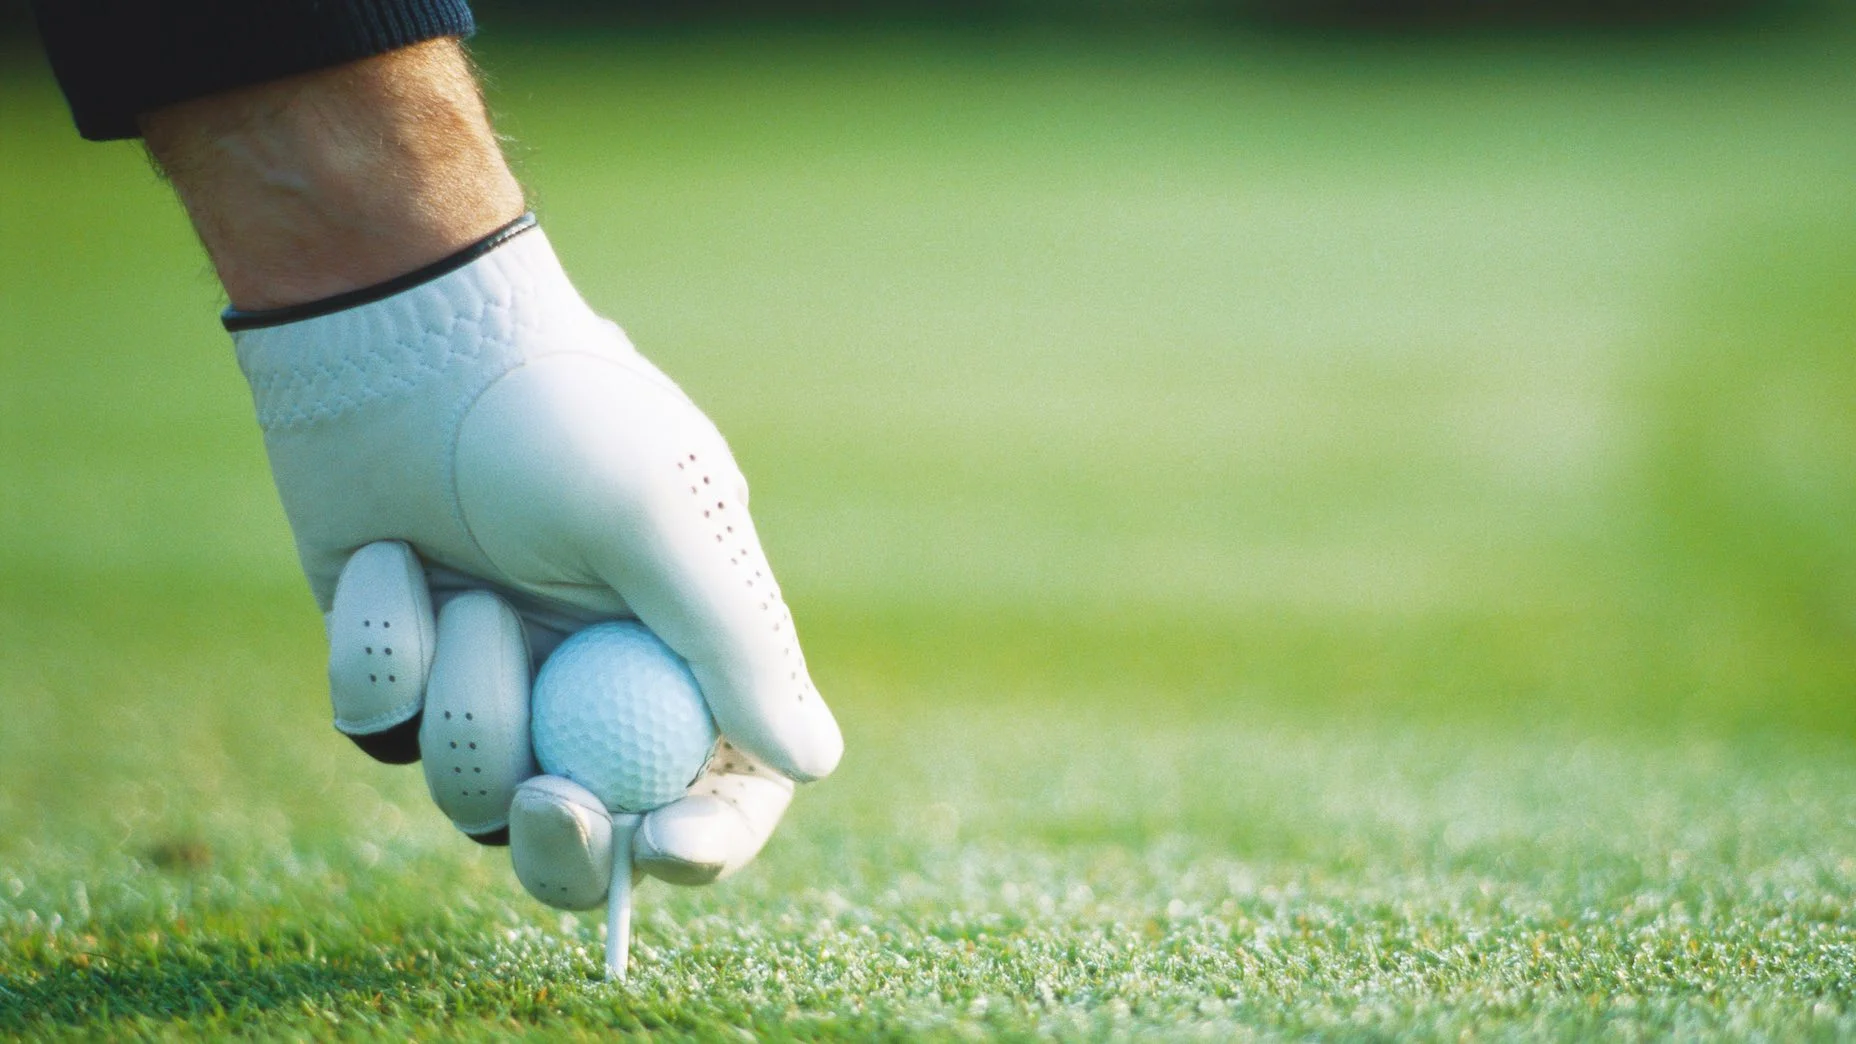 10 basics that will help beginner golfers play the game better